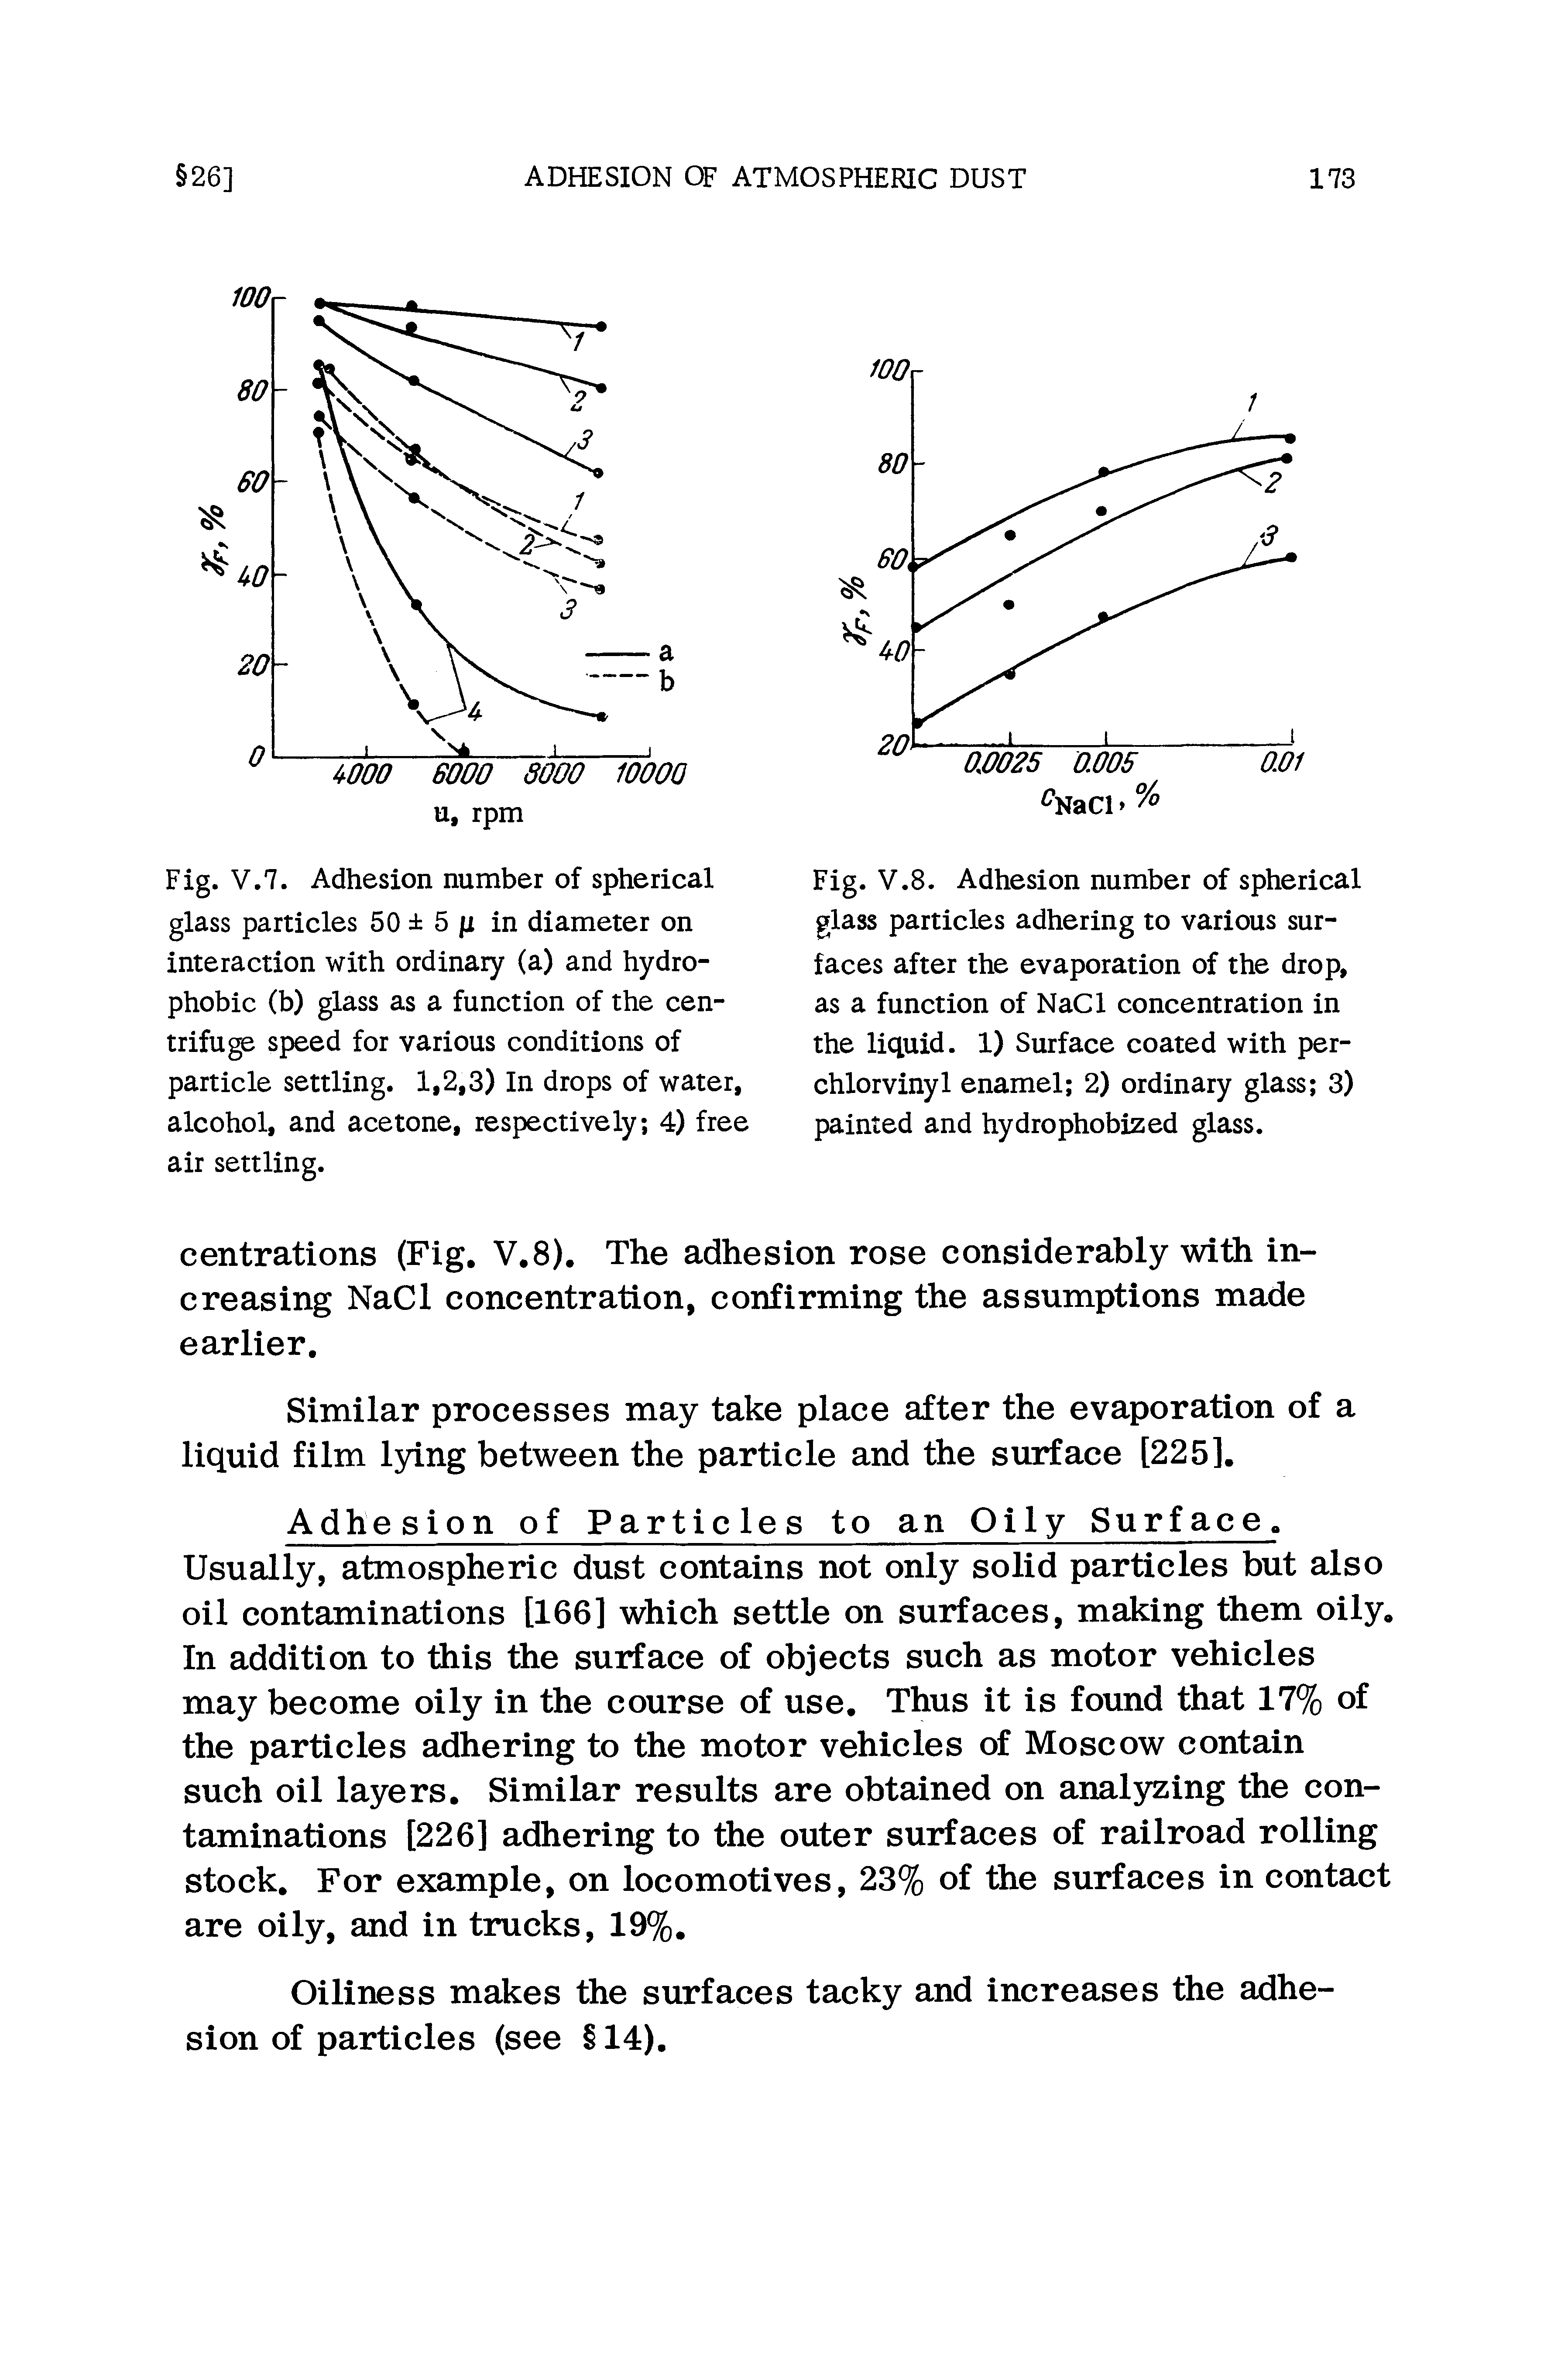 Fig. V.8. Adhesion number of spherical glass particles adhering to various surfaces after the evaporation of the drop, as a function of NaCl concentration in the liquid. 1) Surface coated with per-chlorvinyl enamel 2) ordinary glass 3) painted and hydrophobized glass.